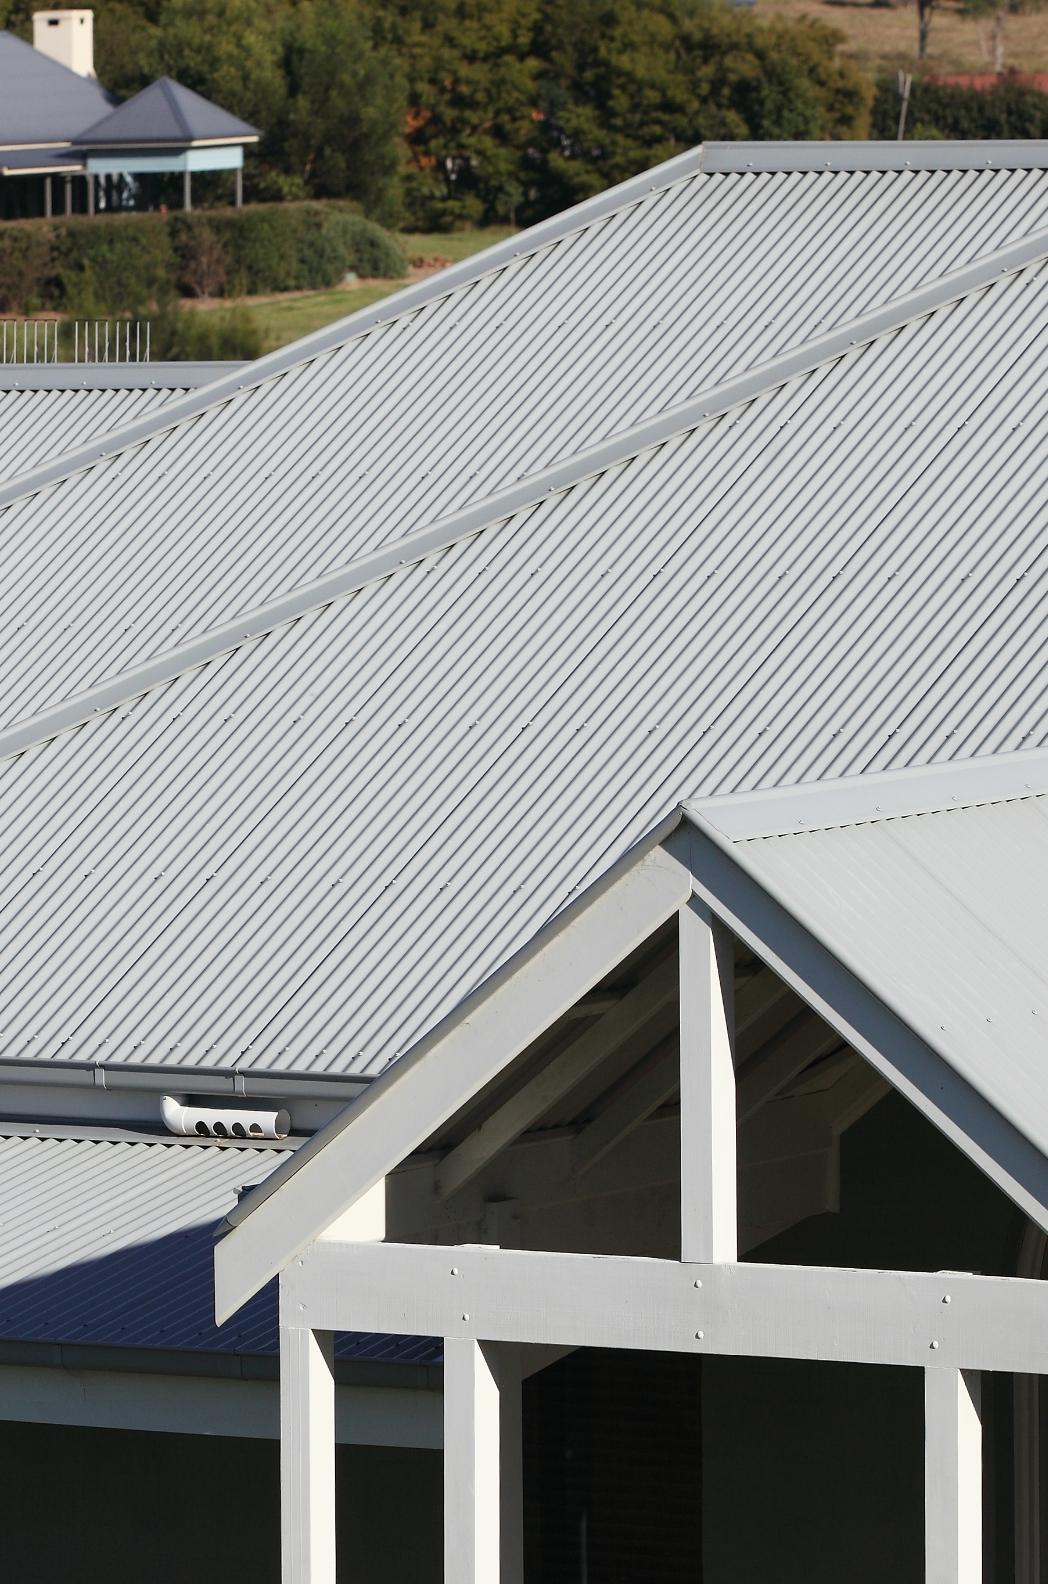 House with CUSTOM ORB steel roofing manufactured from COLORBOND steel in colour Shale Grey